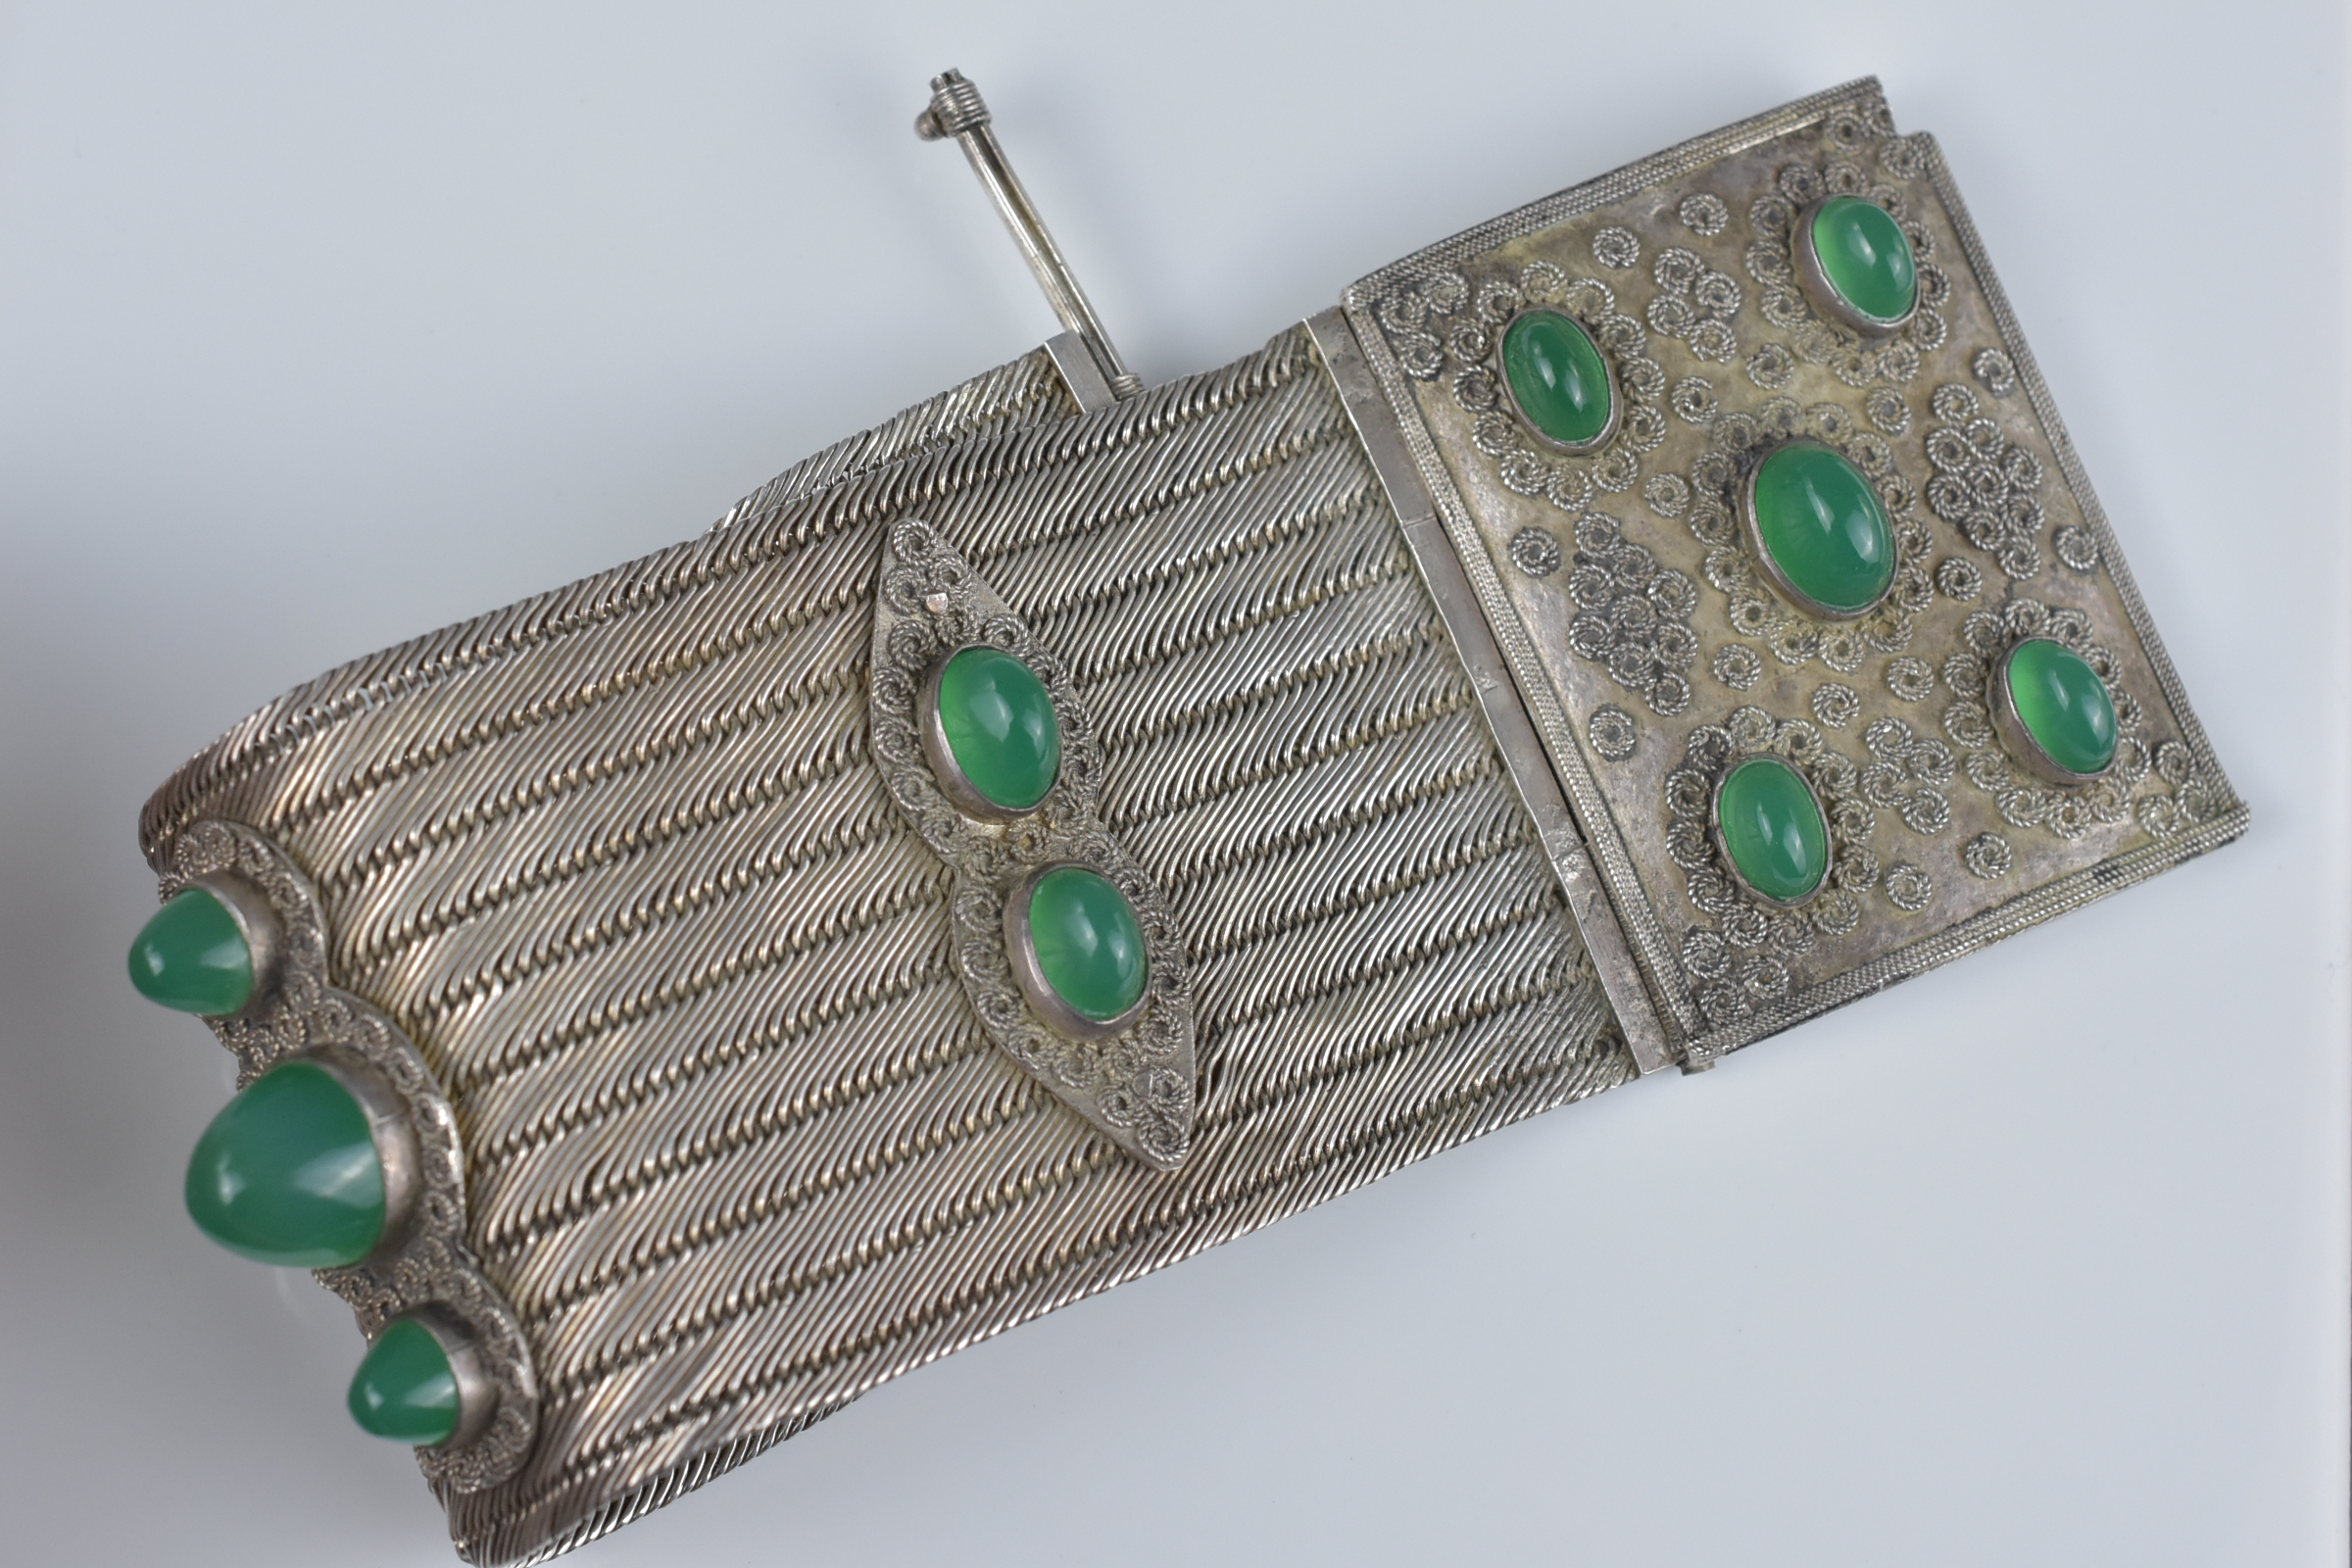 An antique silver metal and chrysoprase cuff bracelet - Image 5 of 5